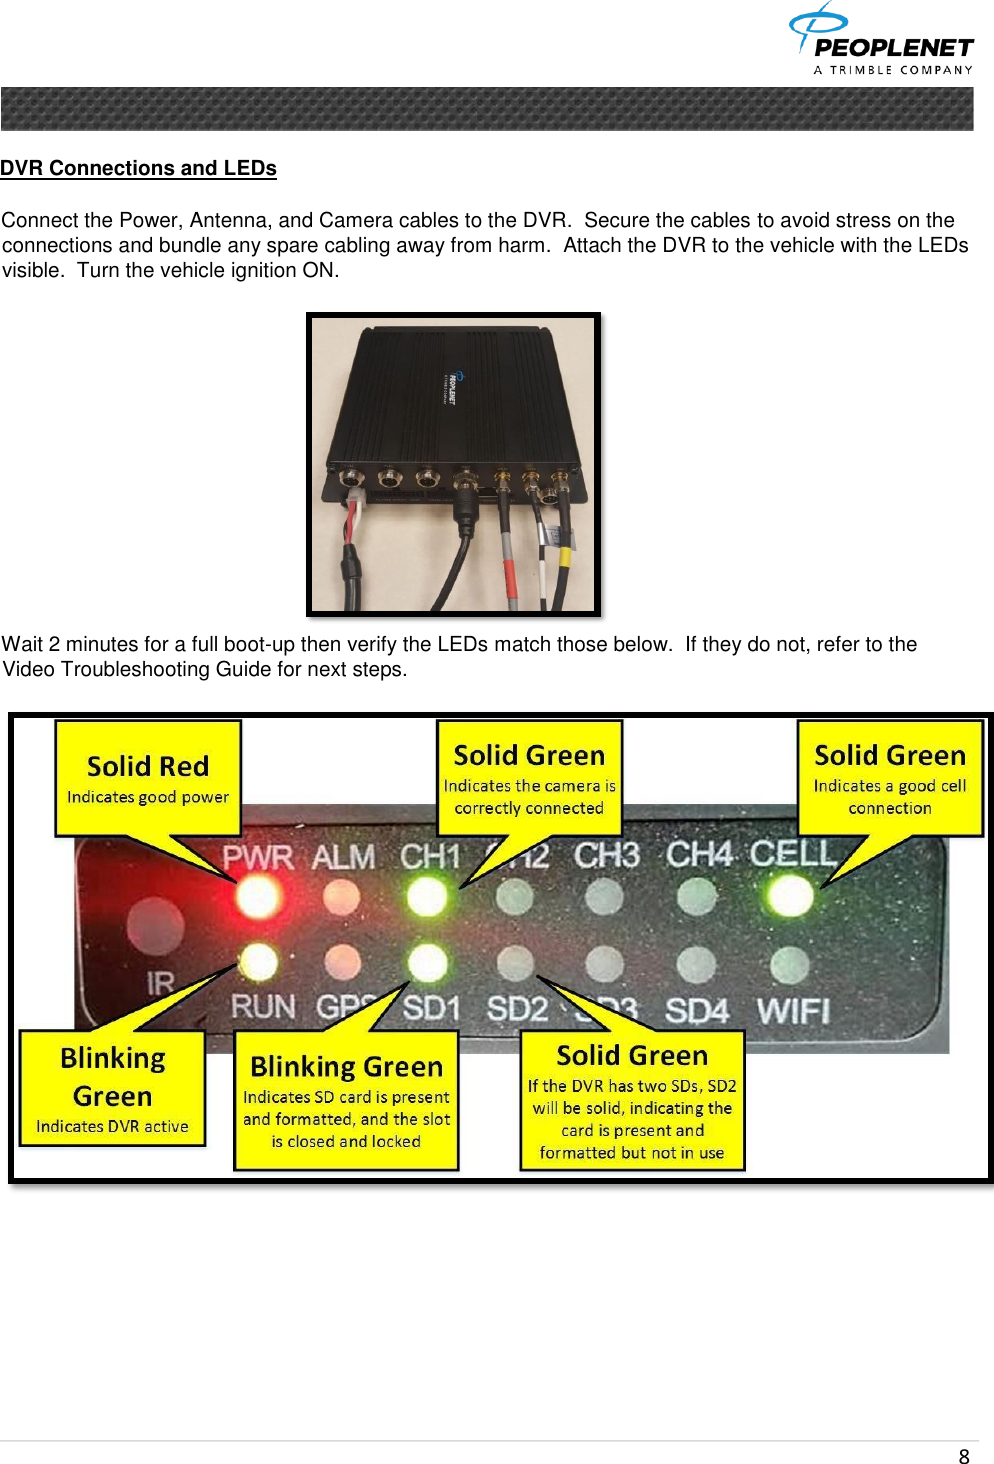  8      DVR Connections and LEDs   Connect the Power, Antenna, and Camera cables to the DVR.  Secure the cables to avoid stress on the connections and bundle any spare cabling away from harm.  Attach the DVR to the vehicle with the LEDs visible.  Turn the vehicle ignition ON.   Wait 2 minutes for a full boot-up then verify the LEDs match those below.  If they do not, refer to the Video Troubleshooting Guide for next steps.             